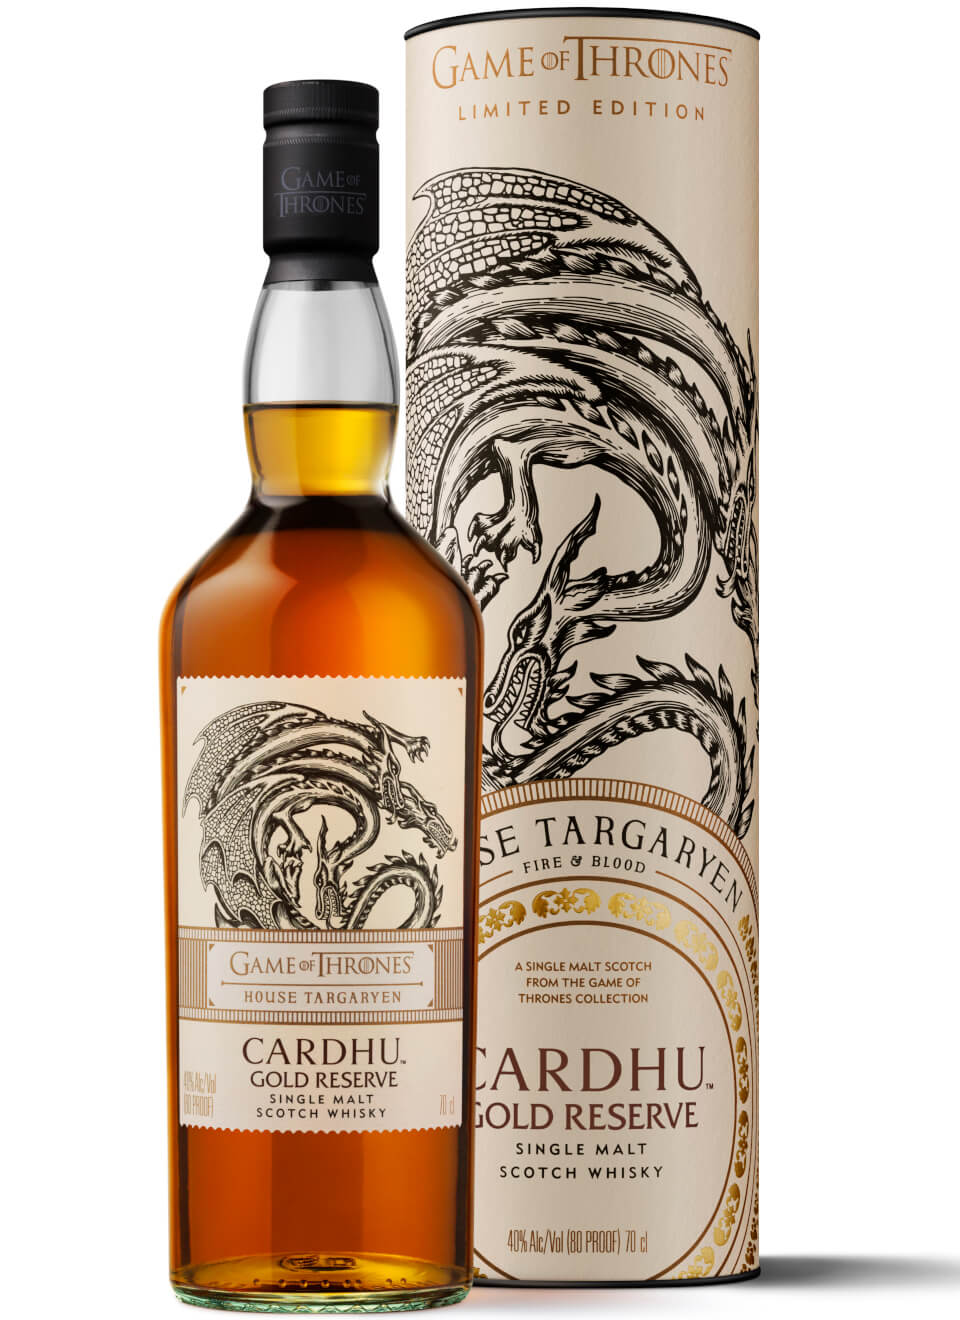 Cardhu Gold Reserve Game of Thrones Edition Whisky 0,7 L